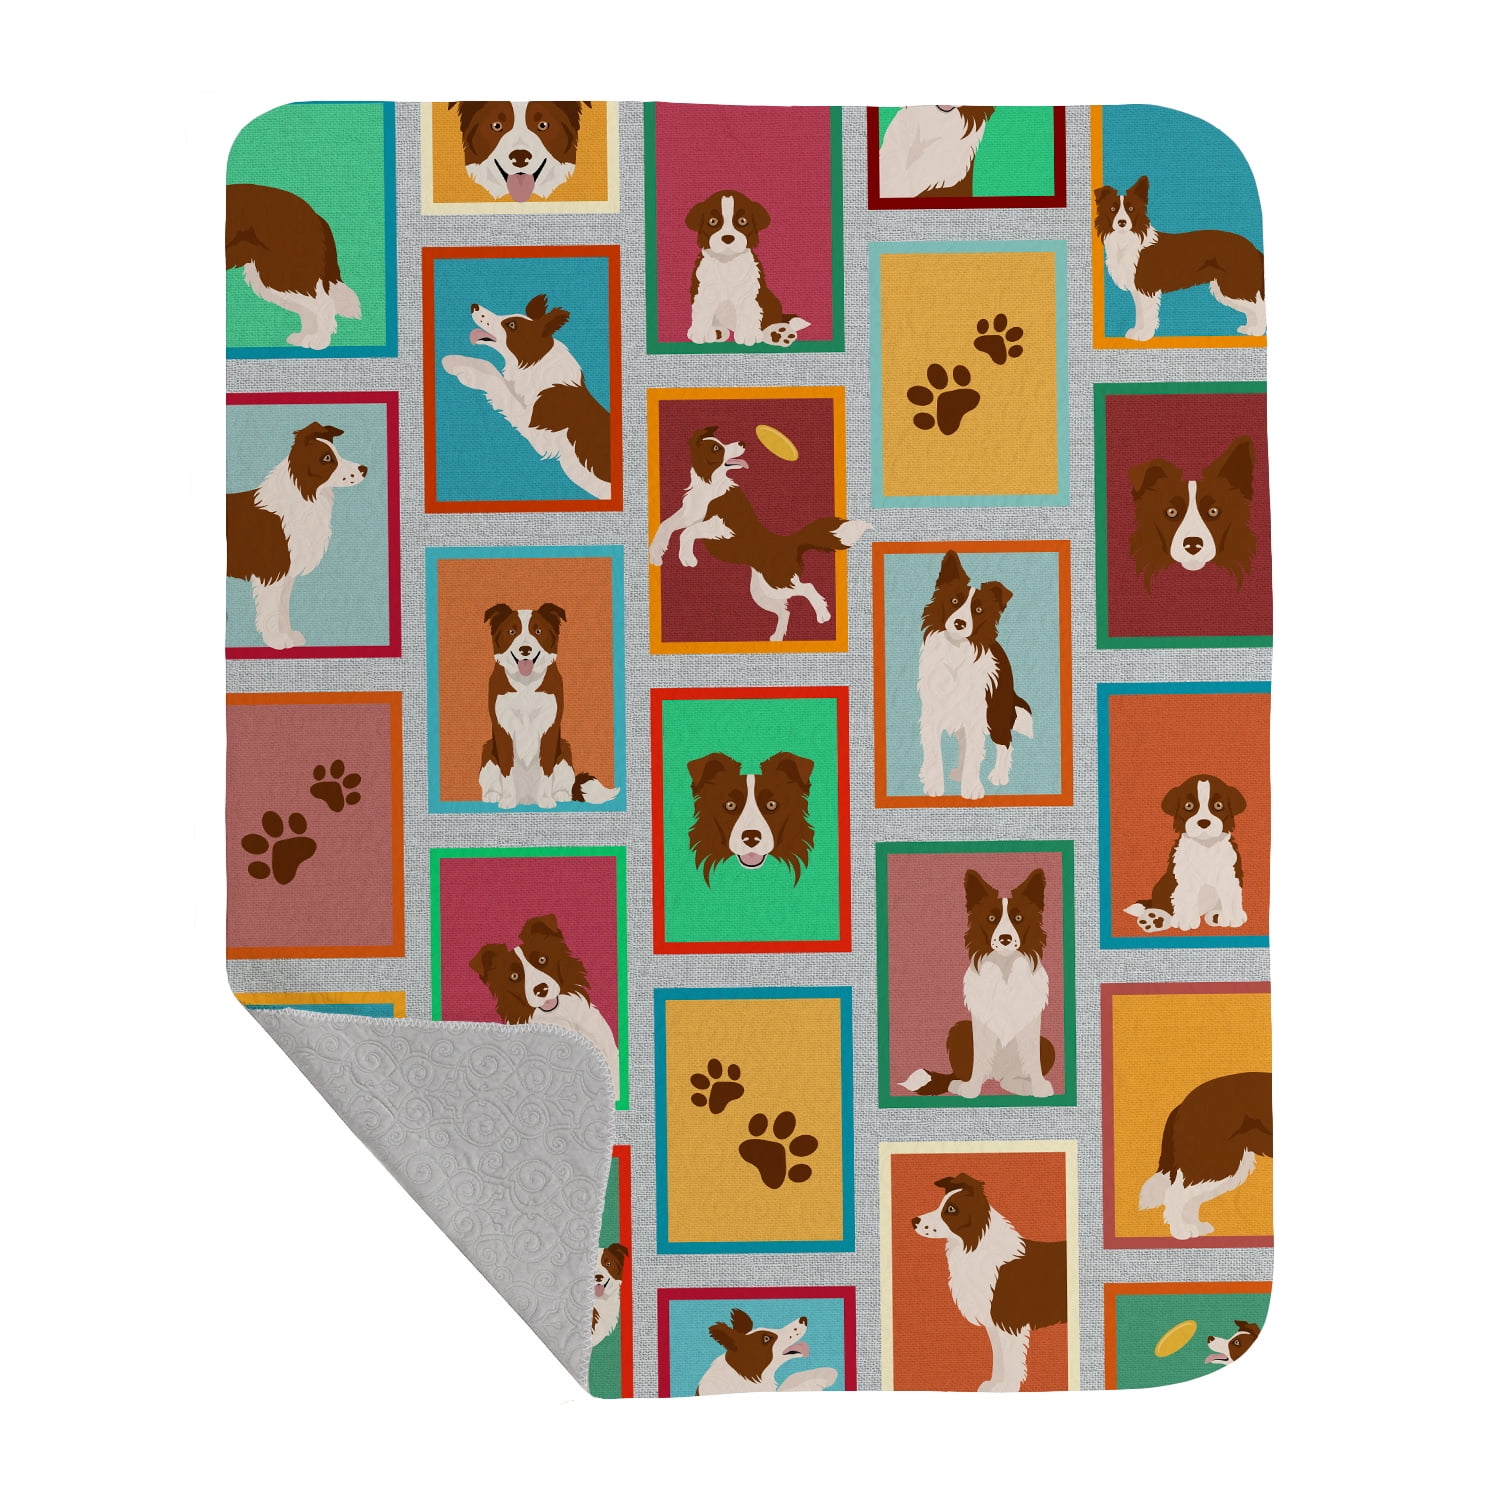 Border Collie Dog Toys - red border collie dog, border collie blanket, border  collie bedding, cute d Art Print by PetFriendly